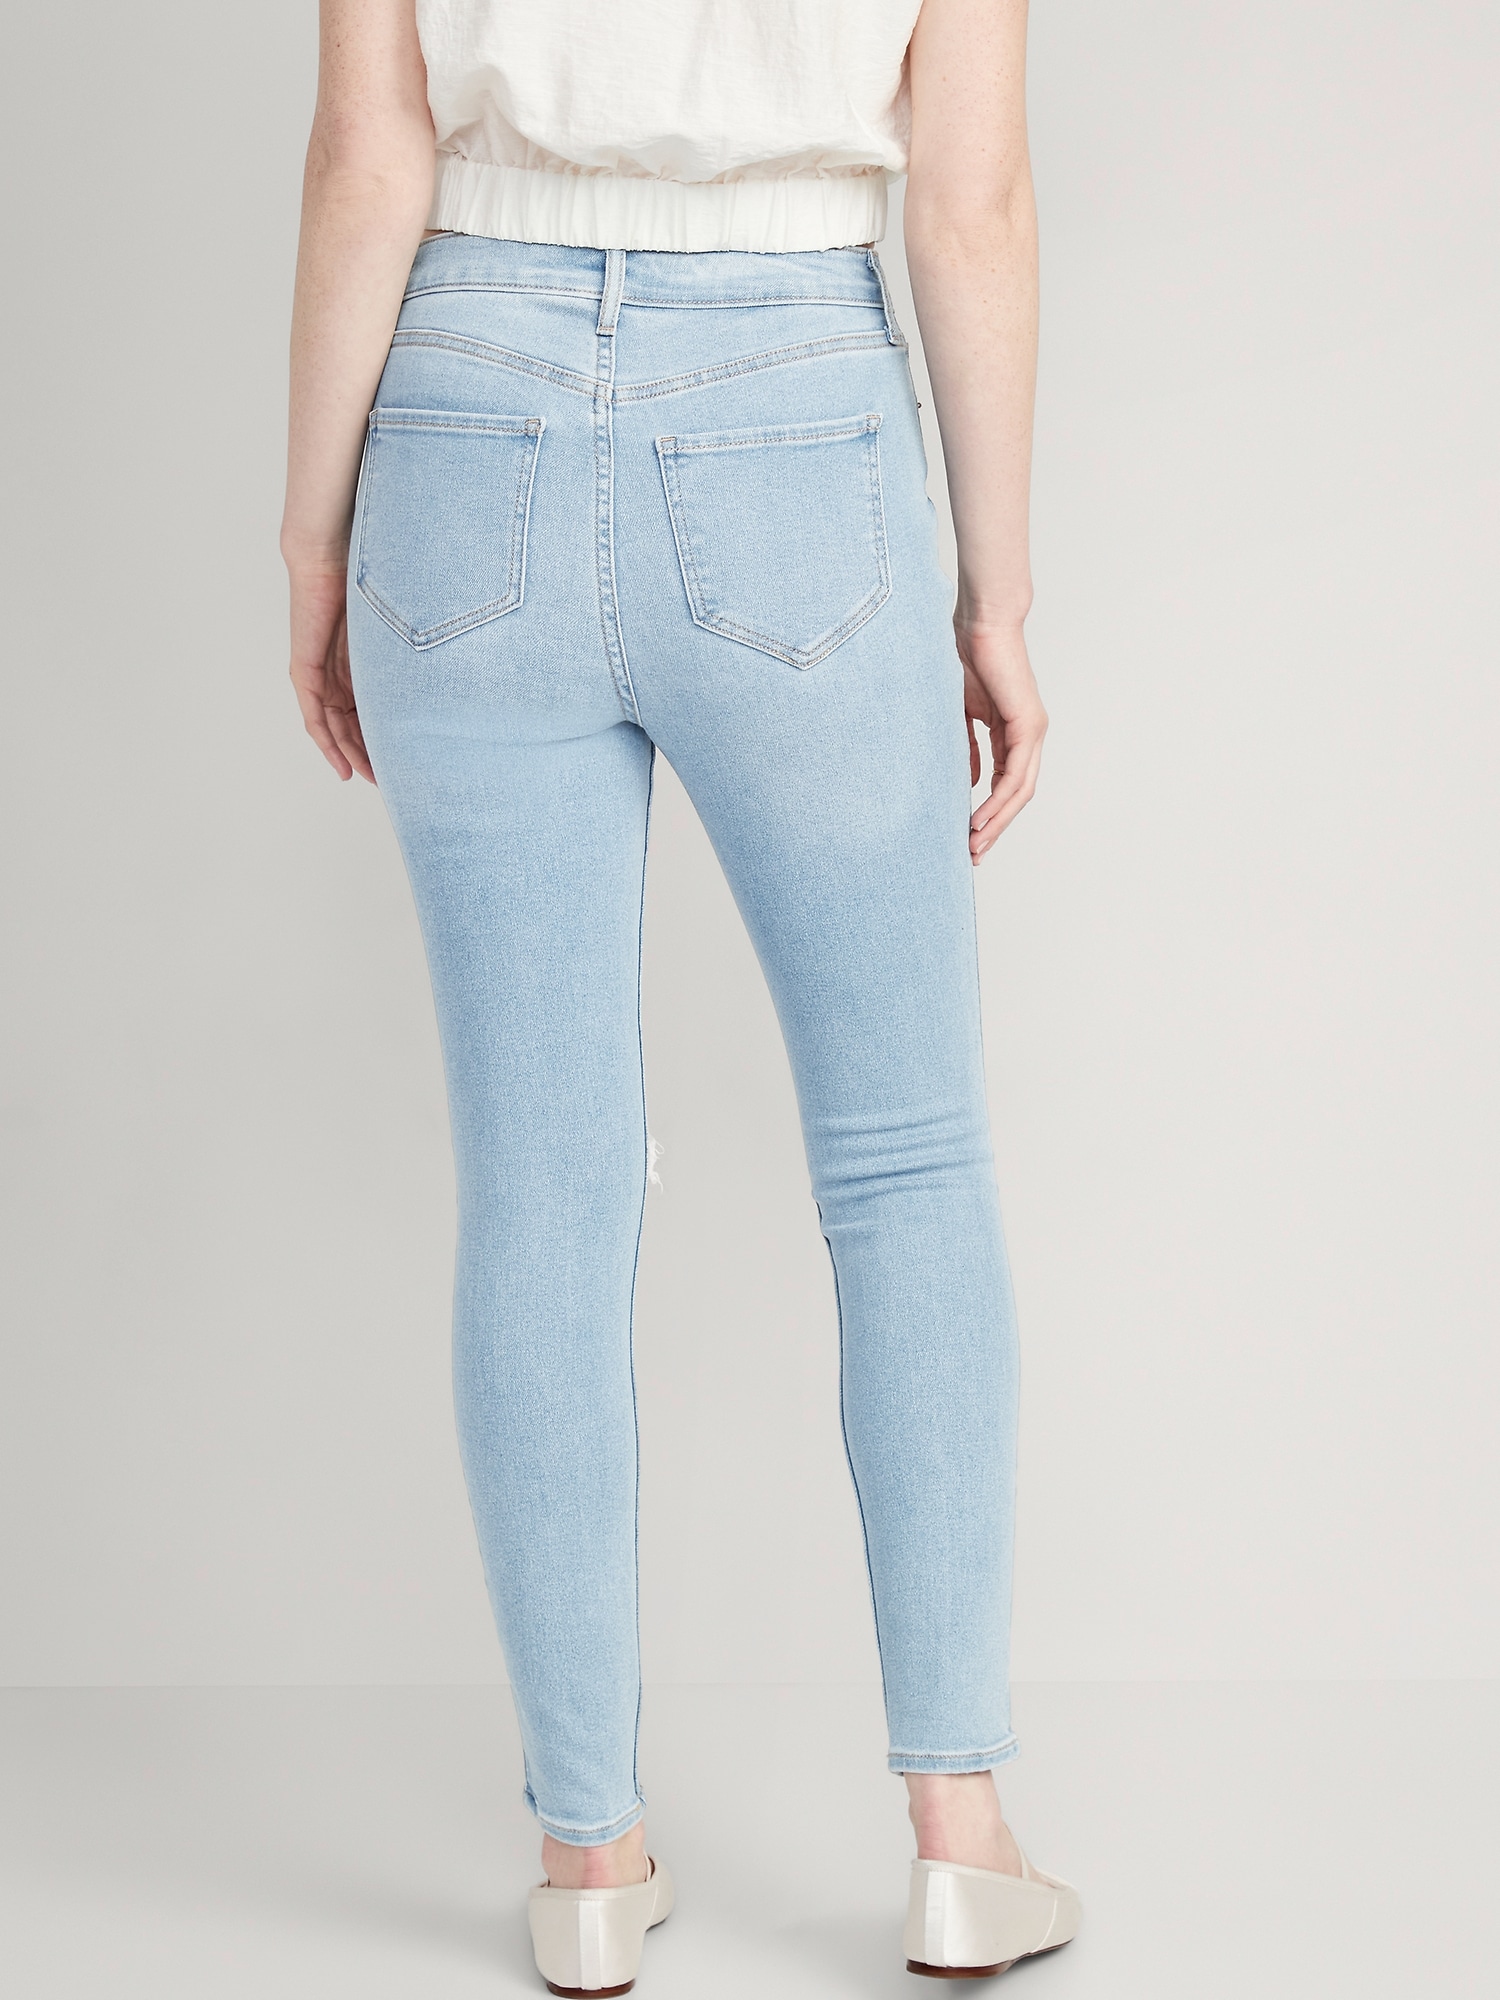 Extra High-Waisted Navy Rockstar Jeans | 360° Women for Stretch Super-Skinny Old